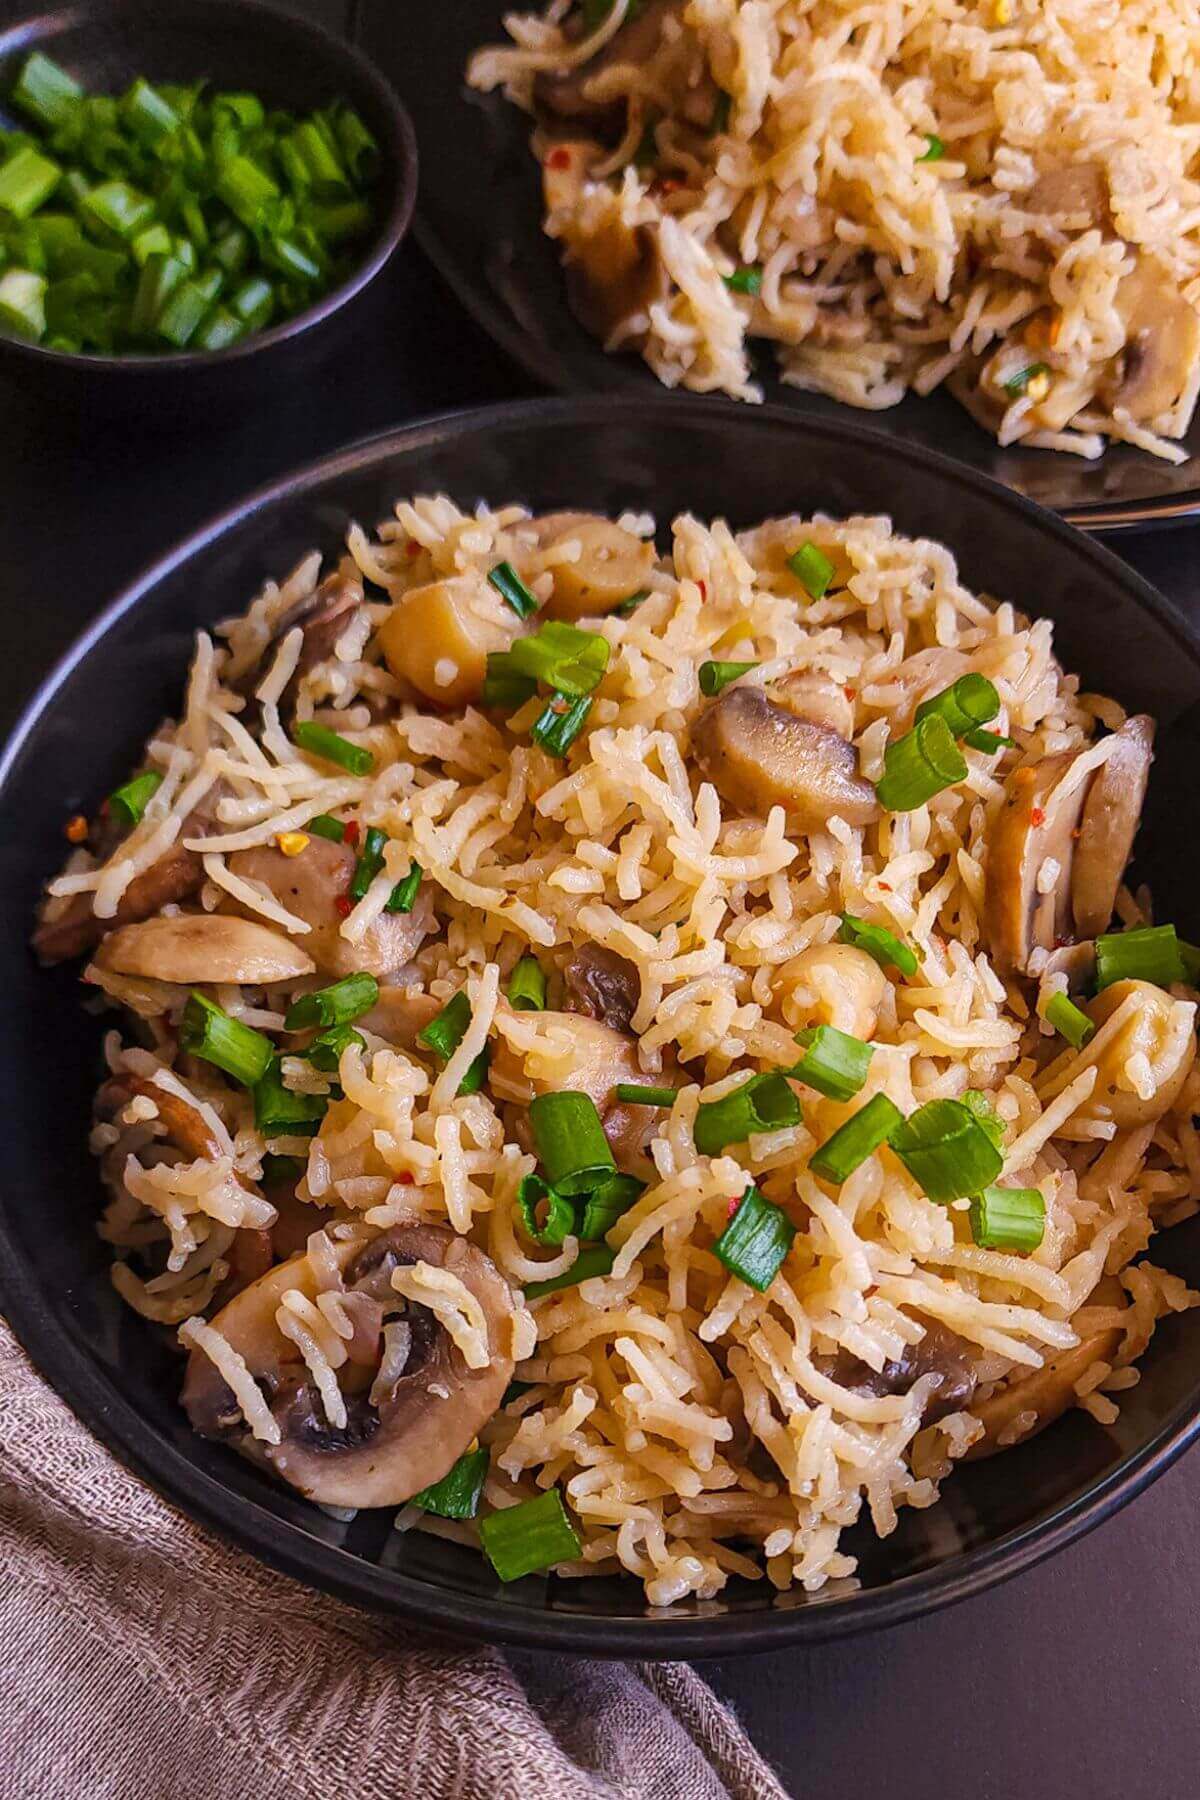 Mushroom rice garnished with chopped spring onion served on a black bowl